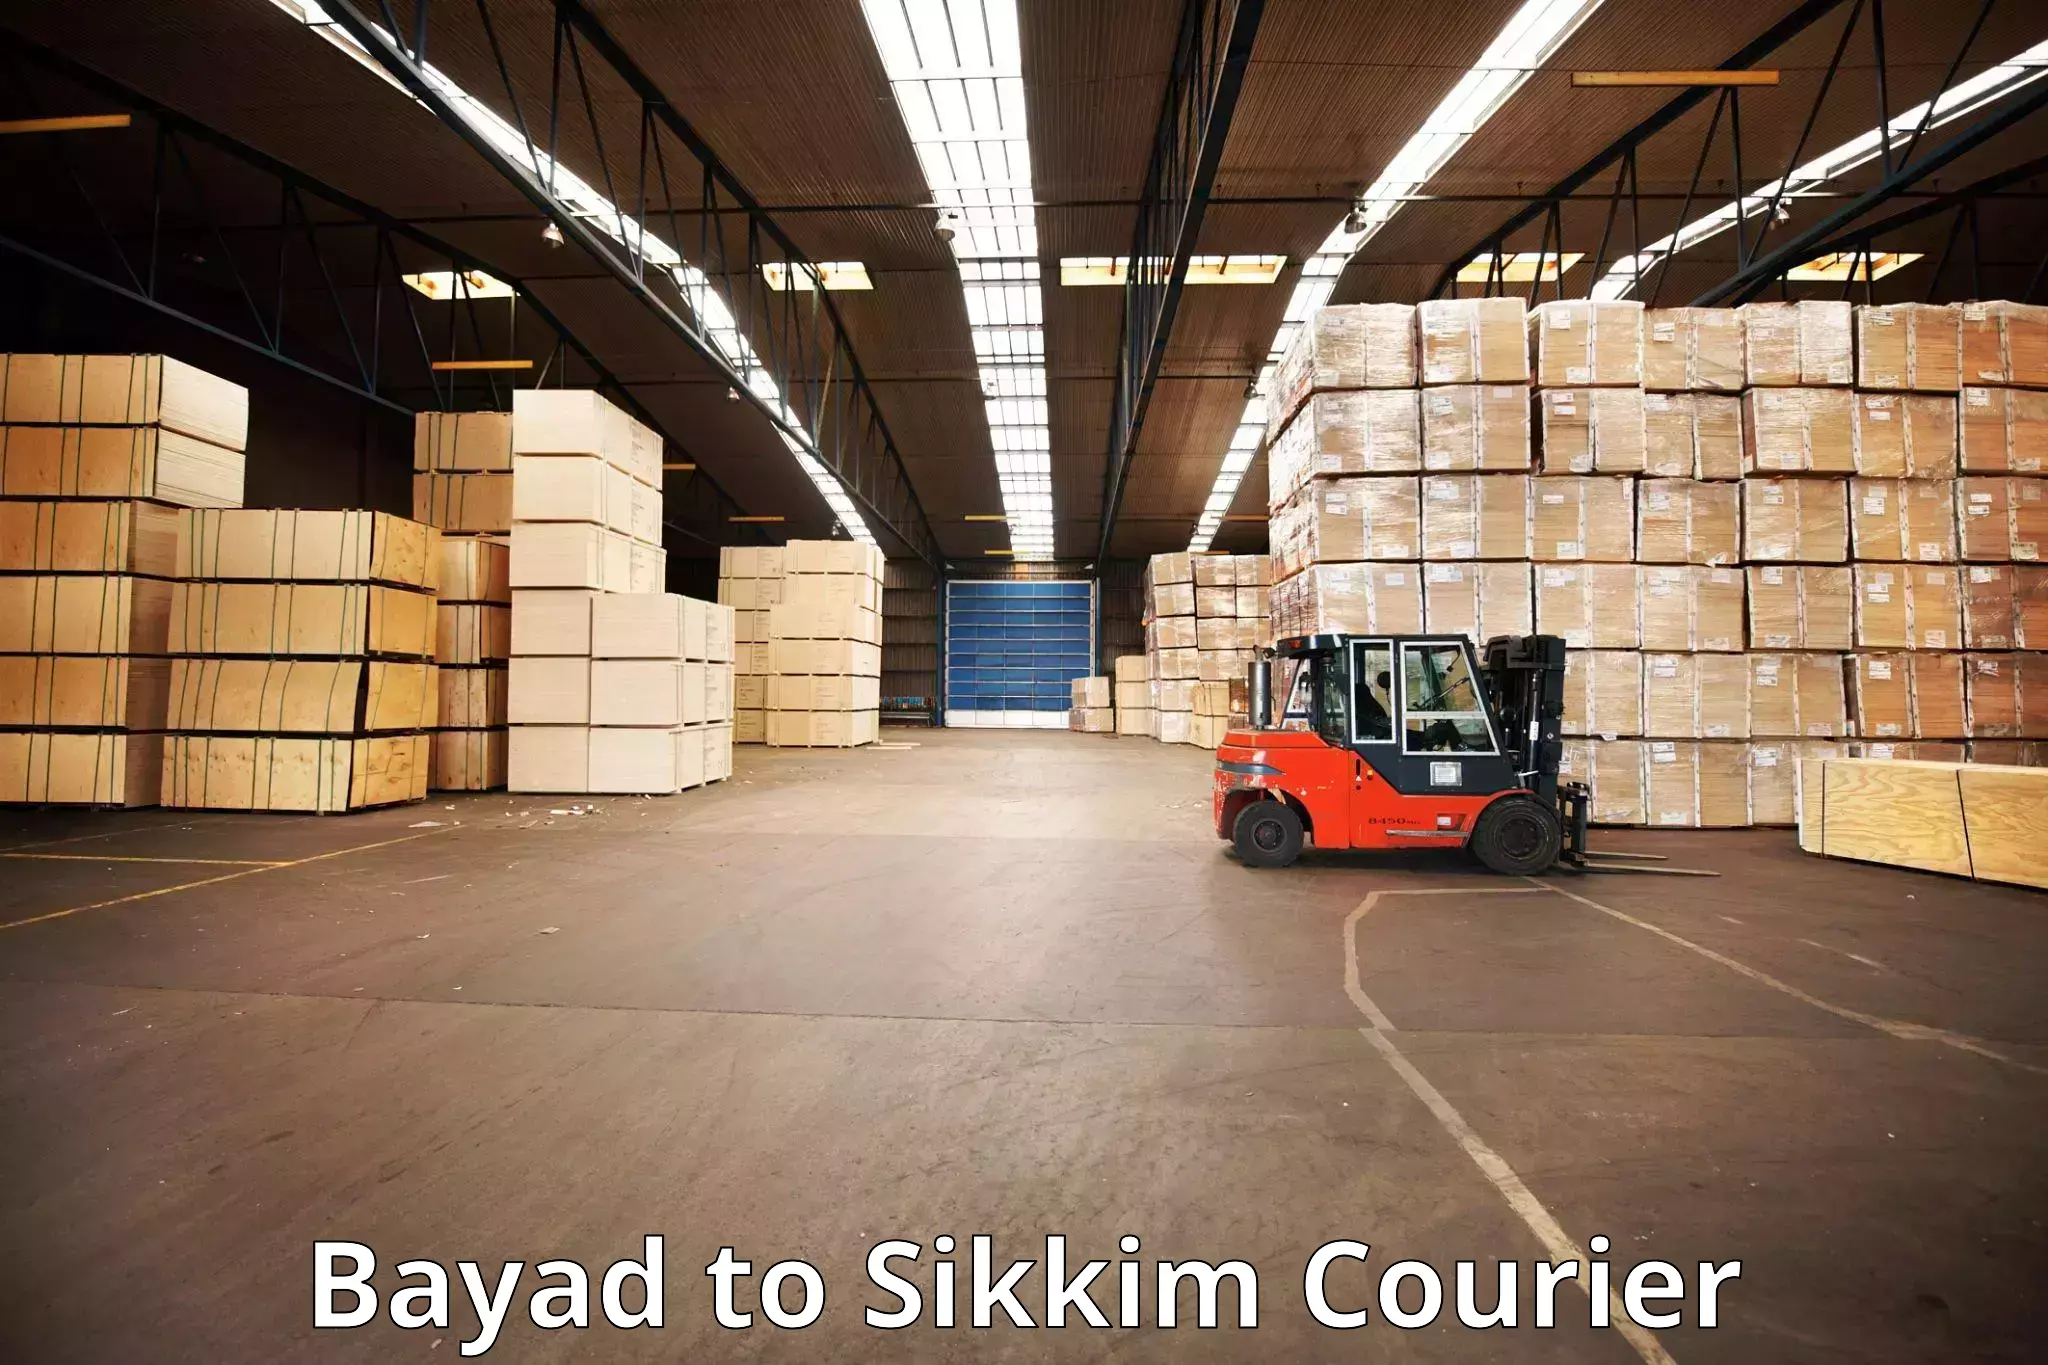 Luggage transport consulting Bayad to Sikkim